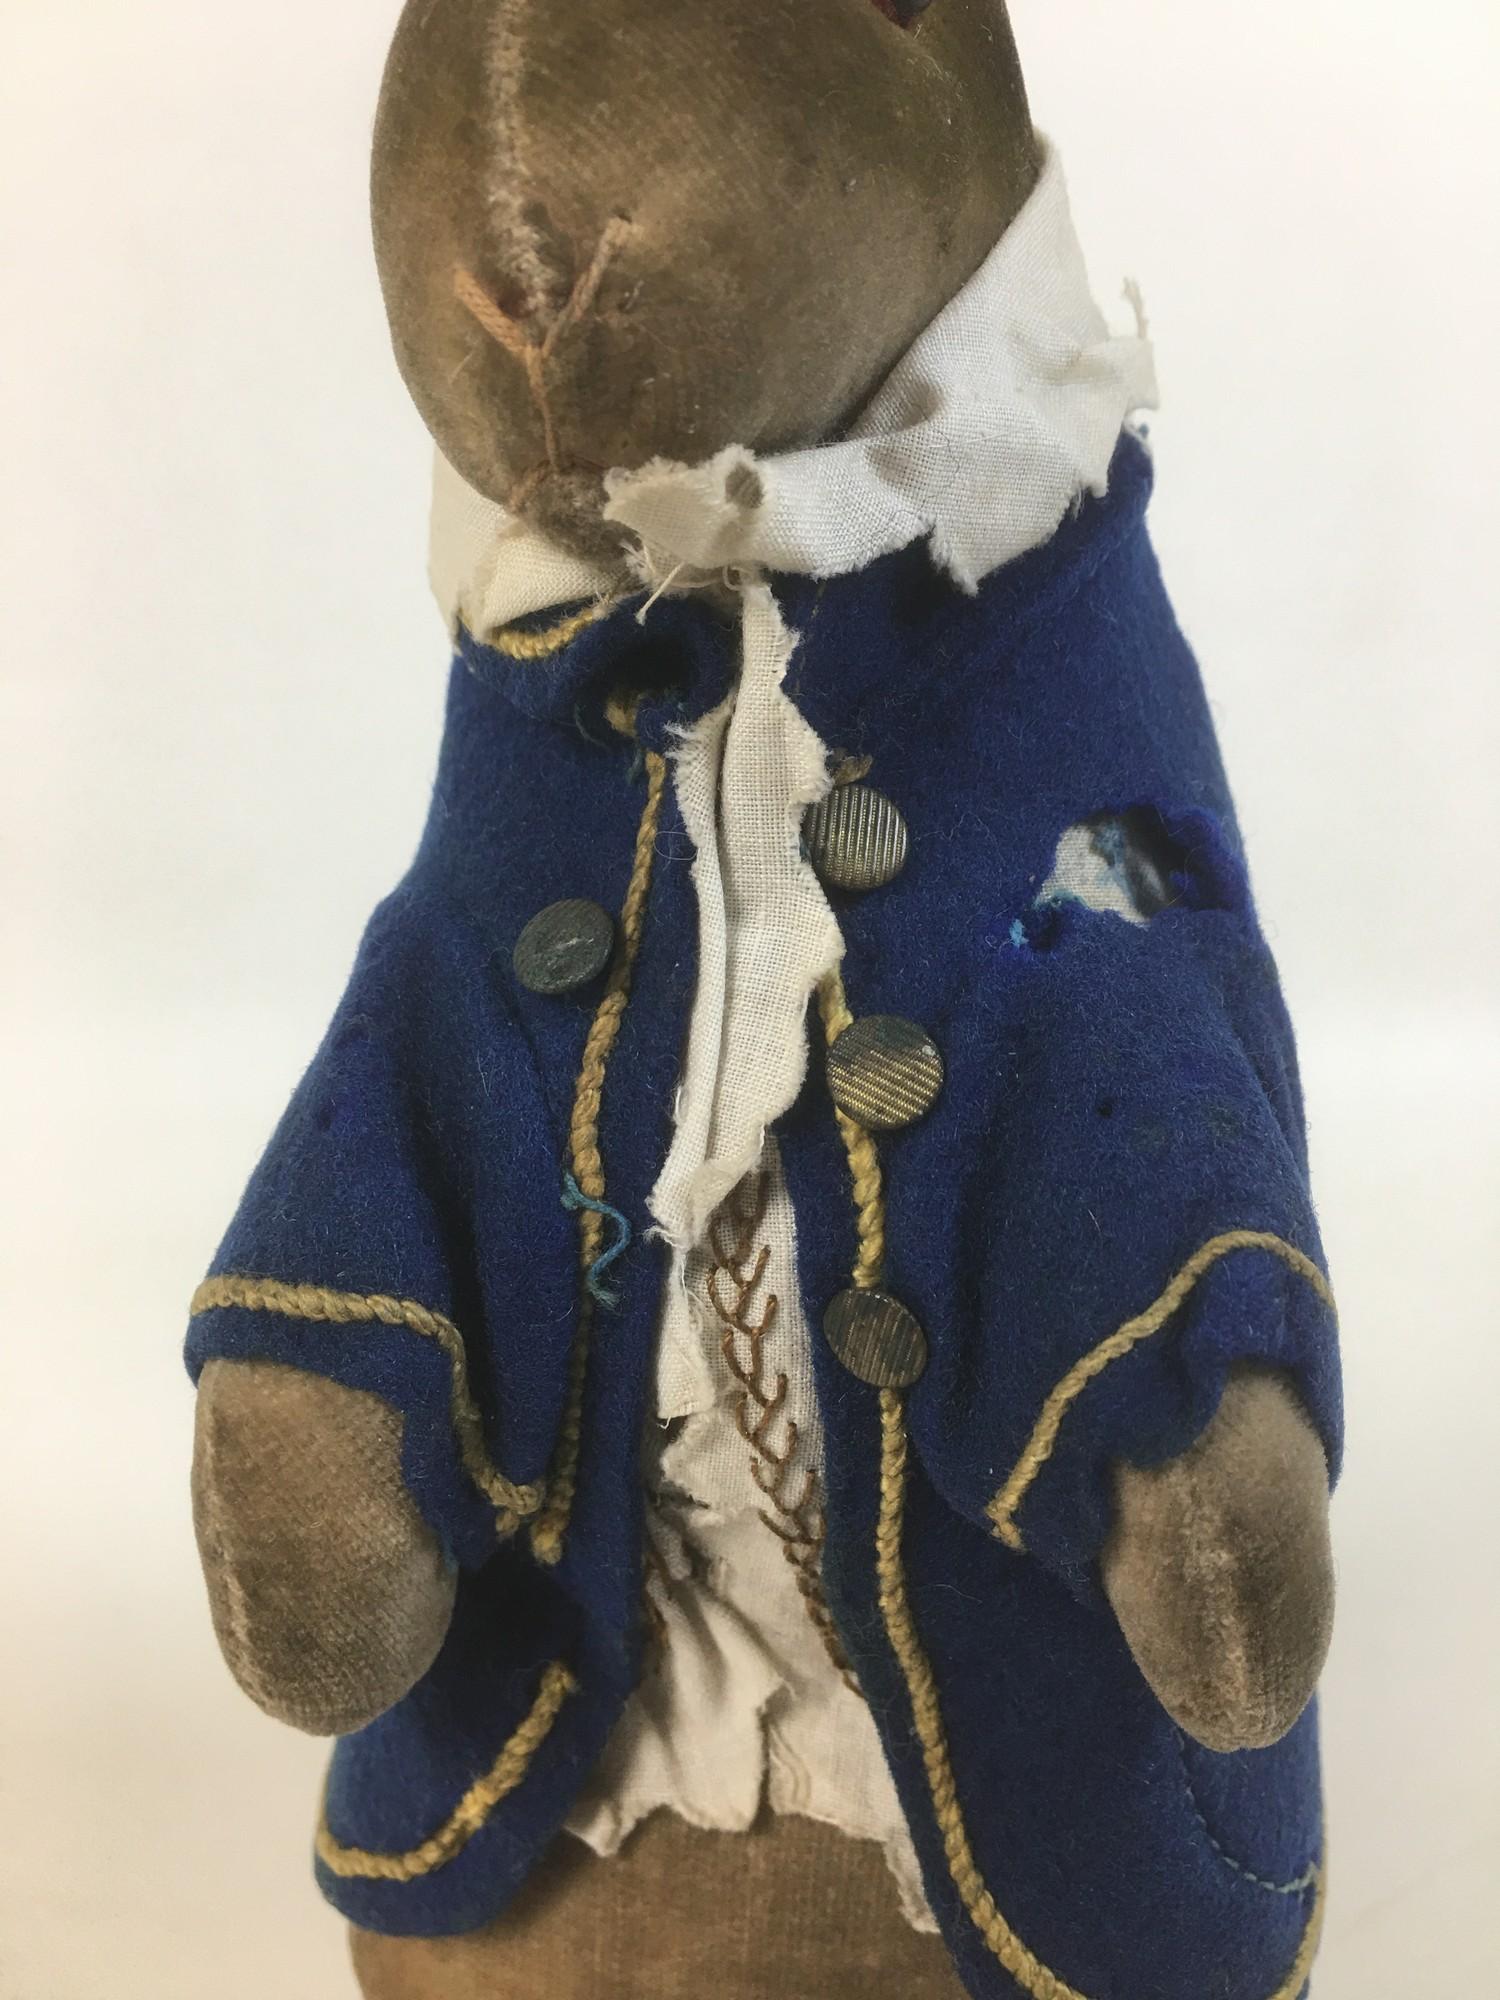 An early 20th century Steiff soft toy of Beatrix Potter's Peter Rabbit, with a white shirt - Image 9 of 11